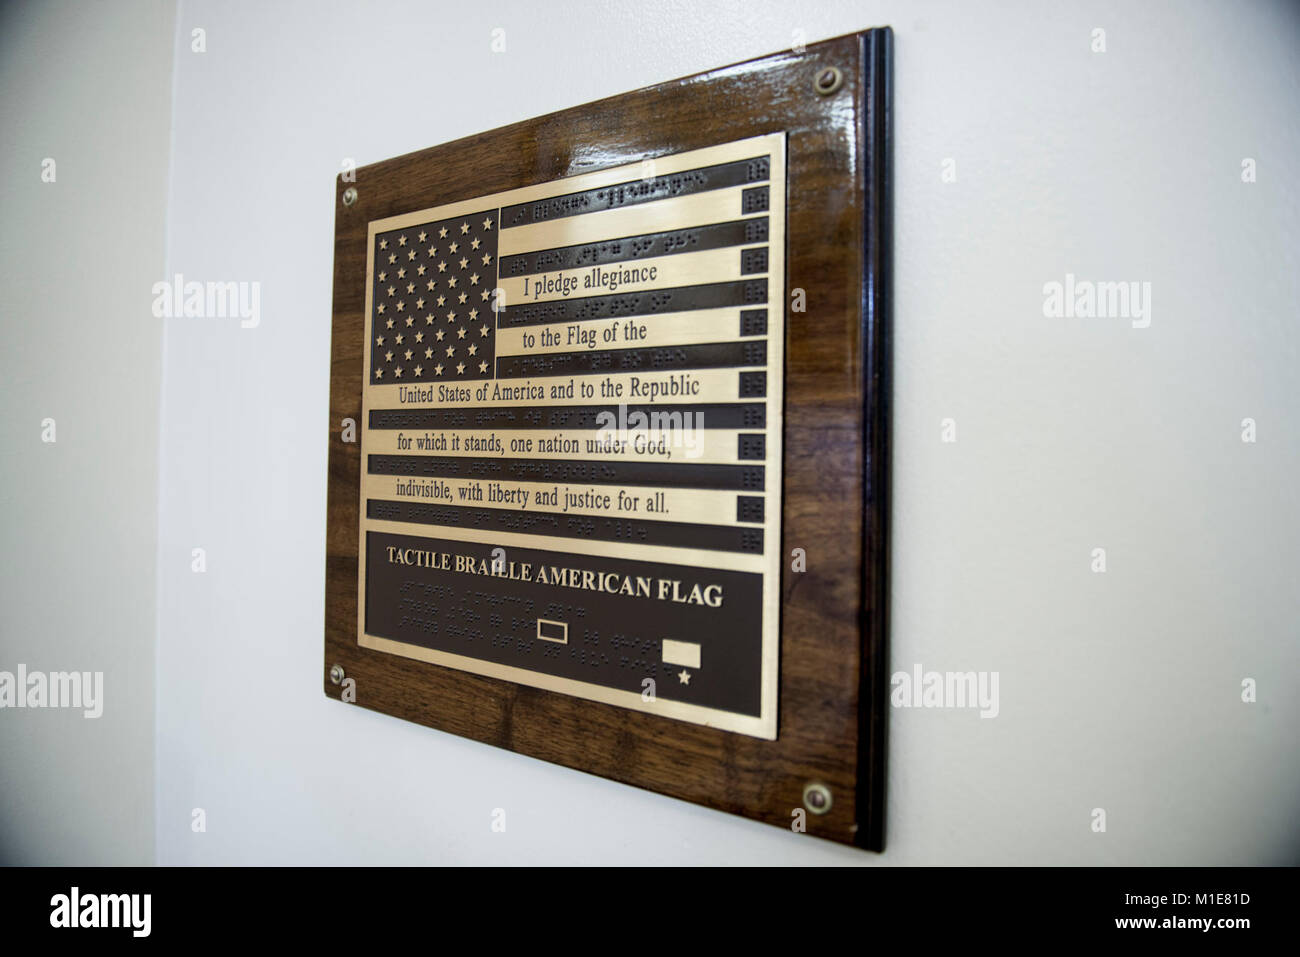 The American Braille tactile flag in the Welcome Center at Arlington National Cemetery, Arlington, Virginia, Jan. 26, 2018.  In 2008, the 110th Congress passed H.R. 4169, which authorized the placement of the Braille Flag at ANC in honor of blind members of the Armed Forces, veterans, and other Americans.  The Braille Flag can be found inside the ANC Welcome Center near the Arlington Tours ticket center.  (U.S. Army Stock Photo